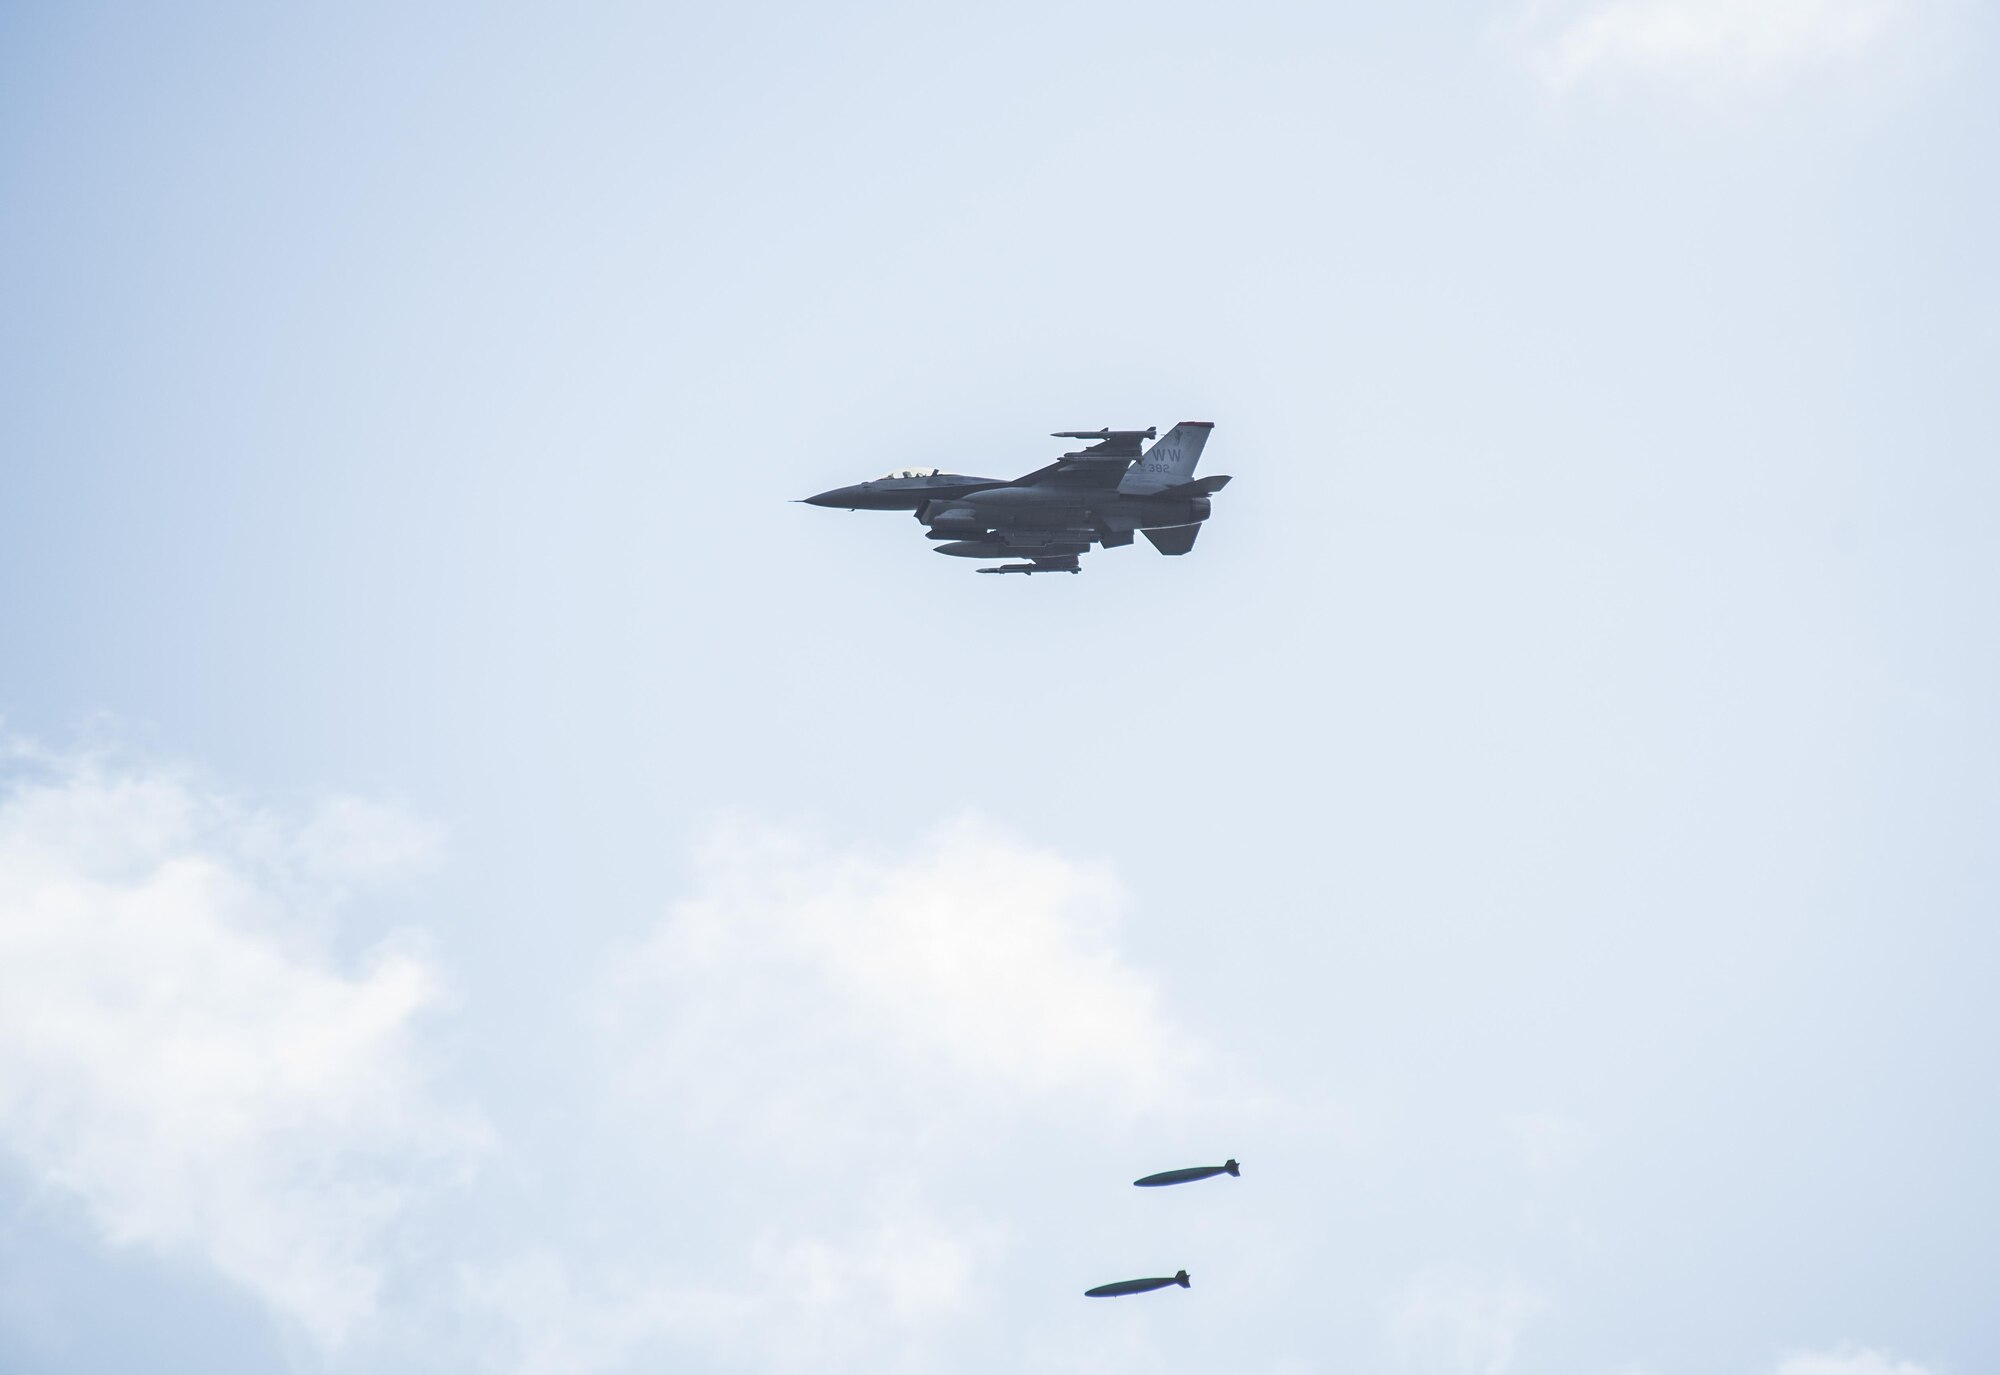 An F-16 Fighting Falcon deploys two, two-thousand pound inert bombs during a Range Day event at Misawa Air Base, Japan, Oct. 21, 2016. During the F-16 demonstration, they performed low-angle strafe gunning runs and various general ballistic bombing techniques. (U.S. Air Force photo by Airman 1st Class Sadie Colbert